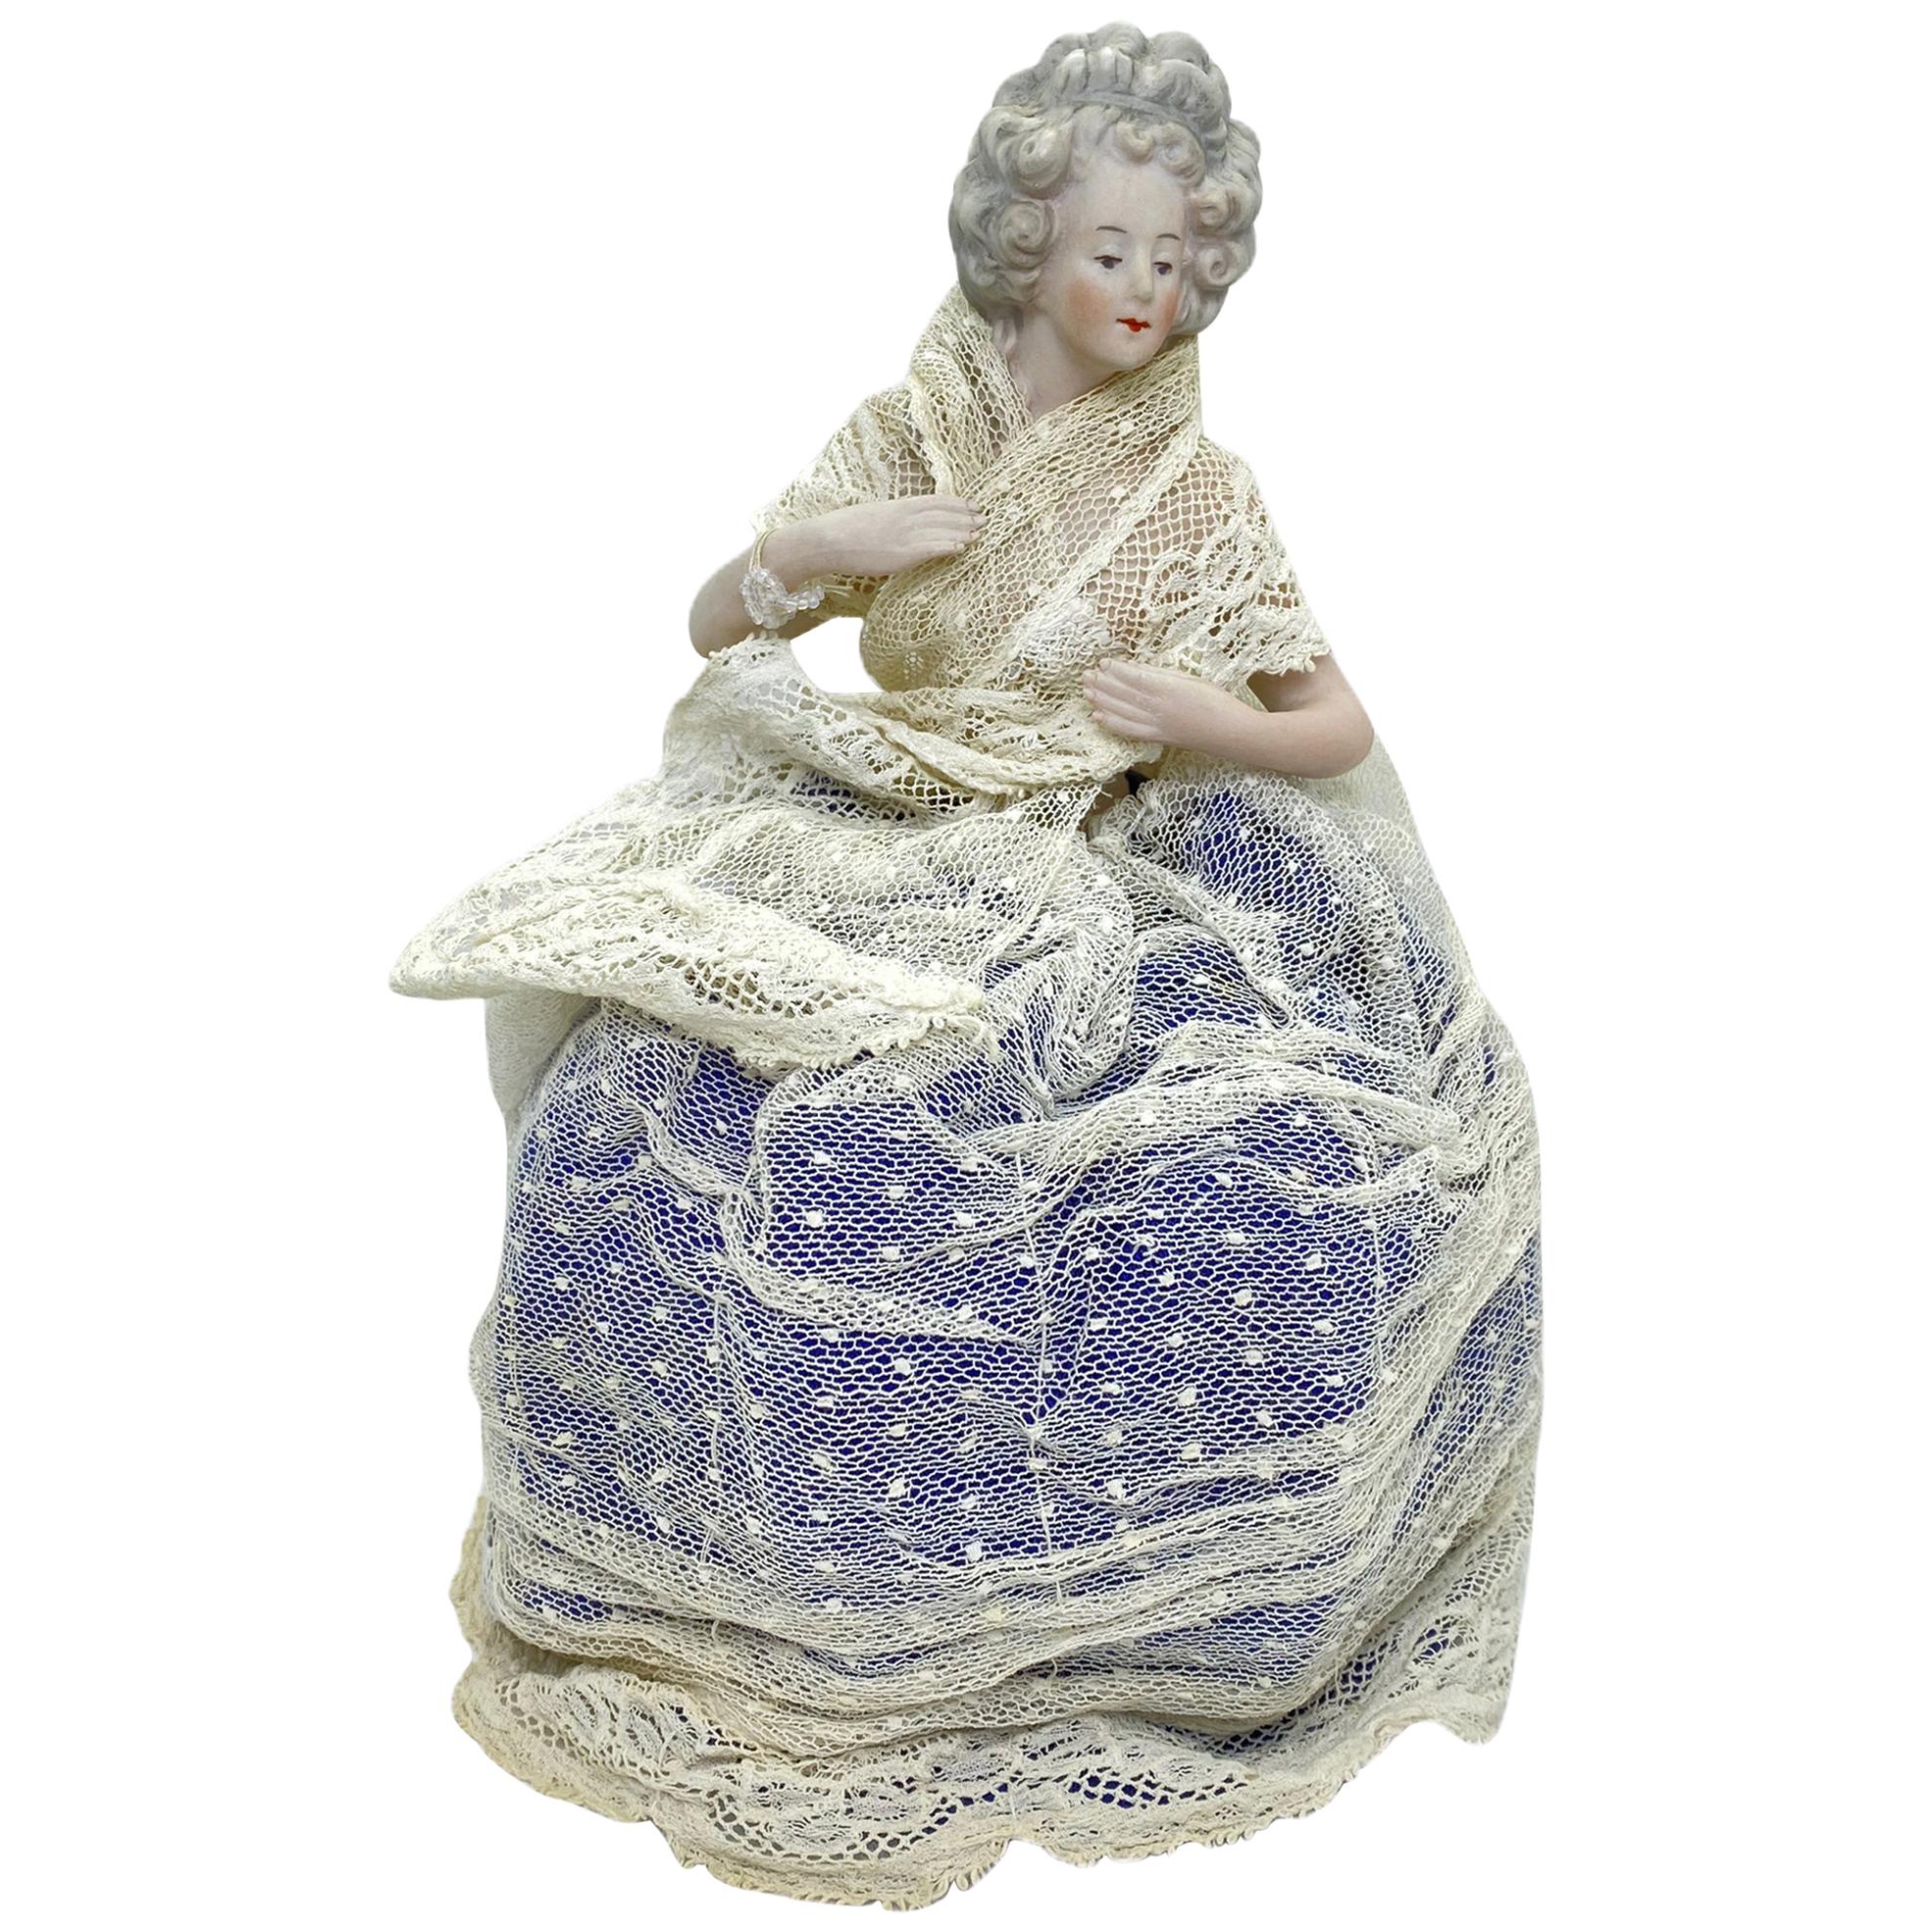 German Bisque Porcelain Half Doll with Original Wire Lace Skirt Antique, 1910s For Sale